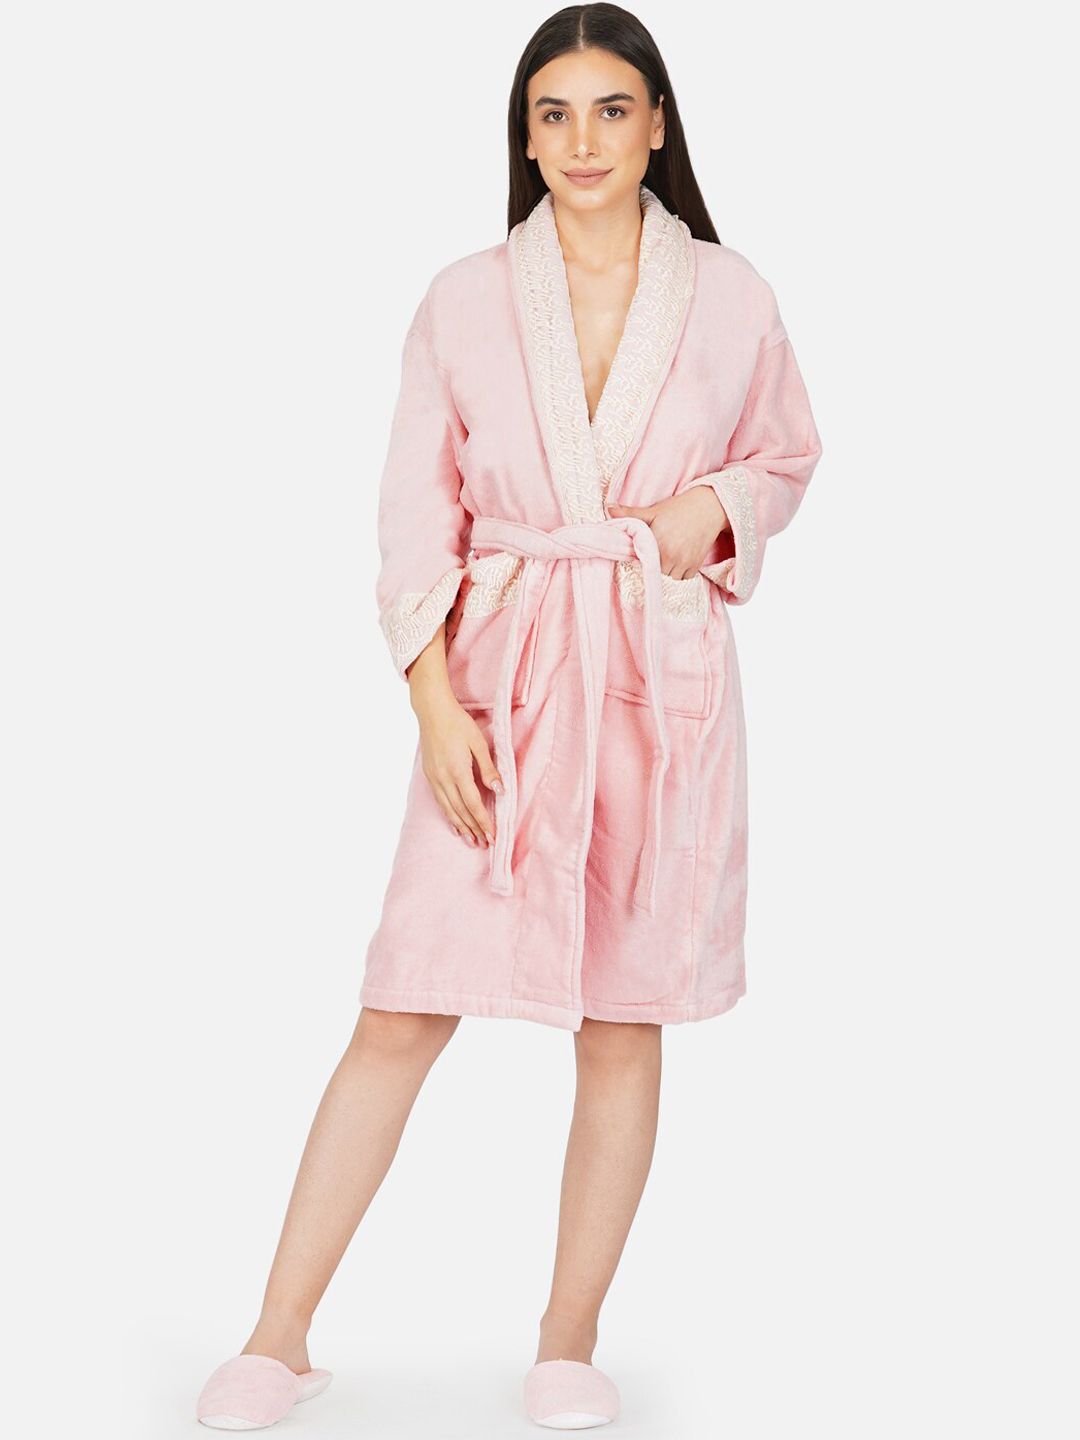 Rangoli Women Peach-Coloured Lace 550 GSM Pure Cotton Bath Robes With Slippers Price in India